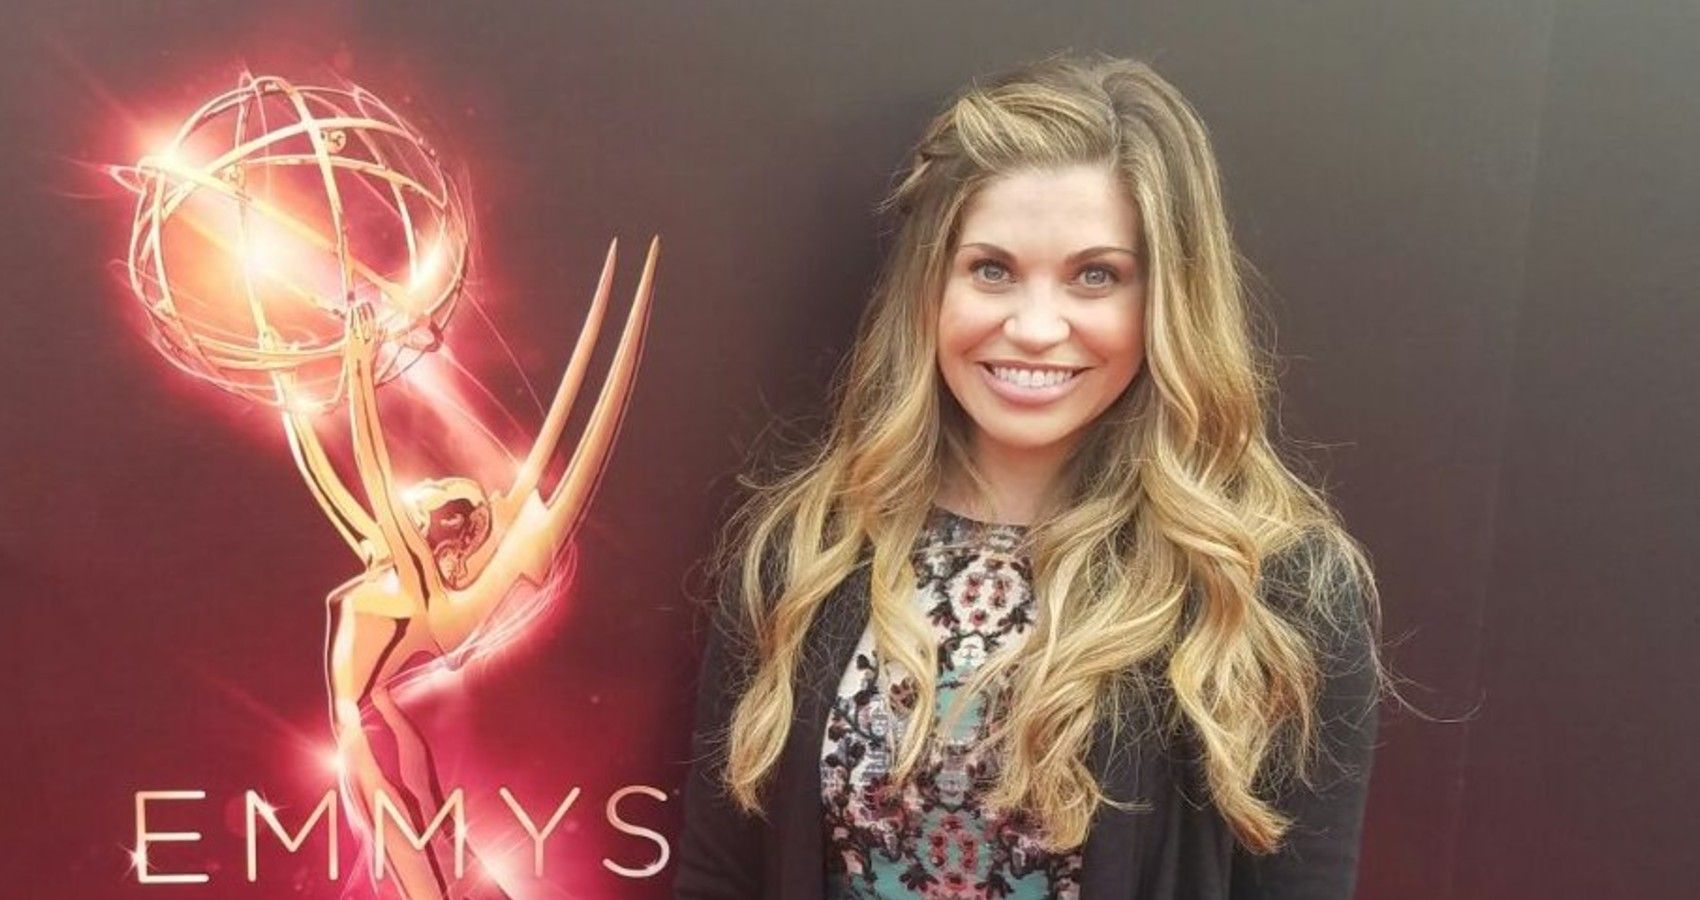 Danielle Fishel at the Emmy awards